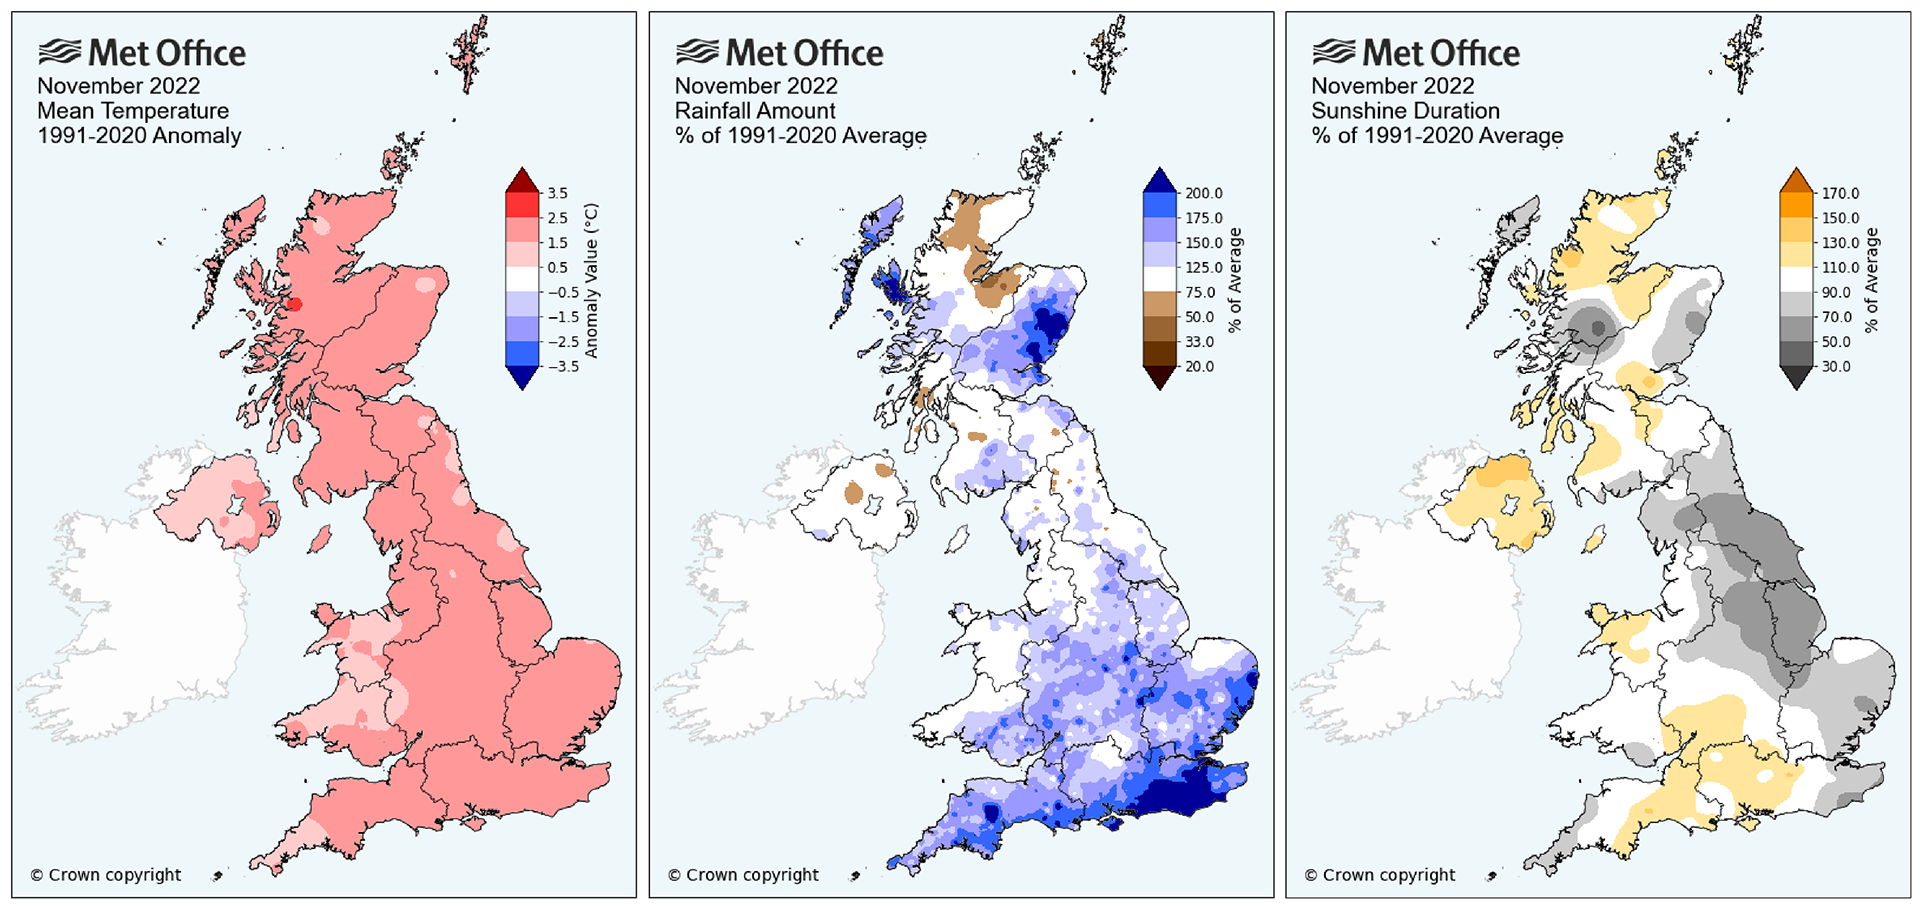 Maps showing above average temperatures for the UK in November, as well as above average rainfall in the south and near-average sunshine for many.